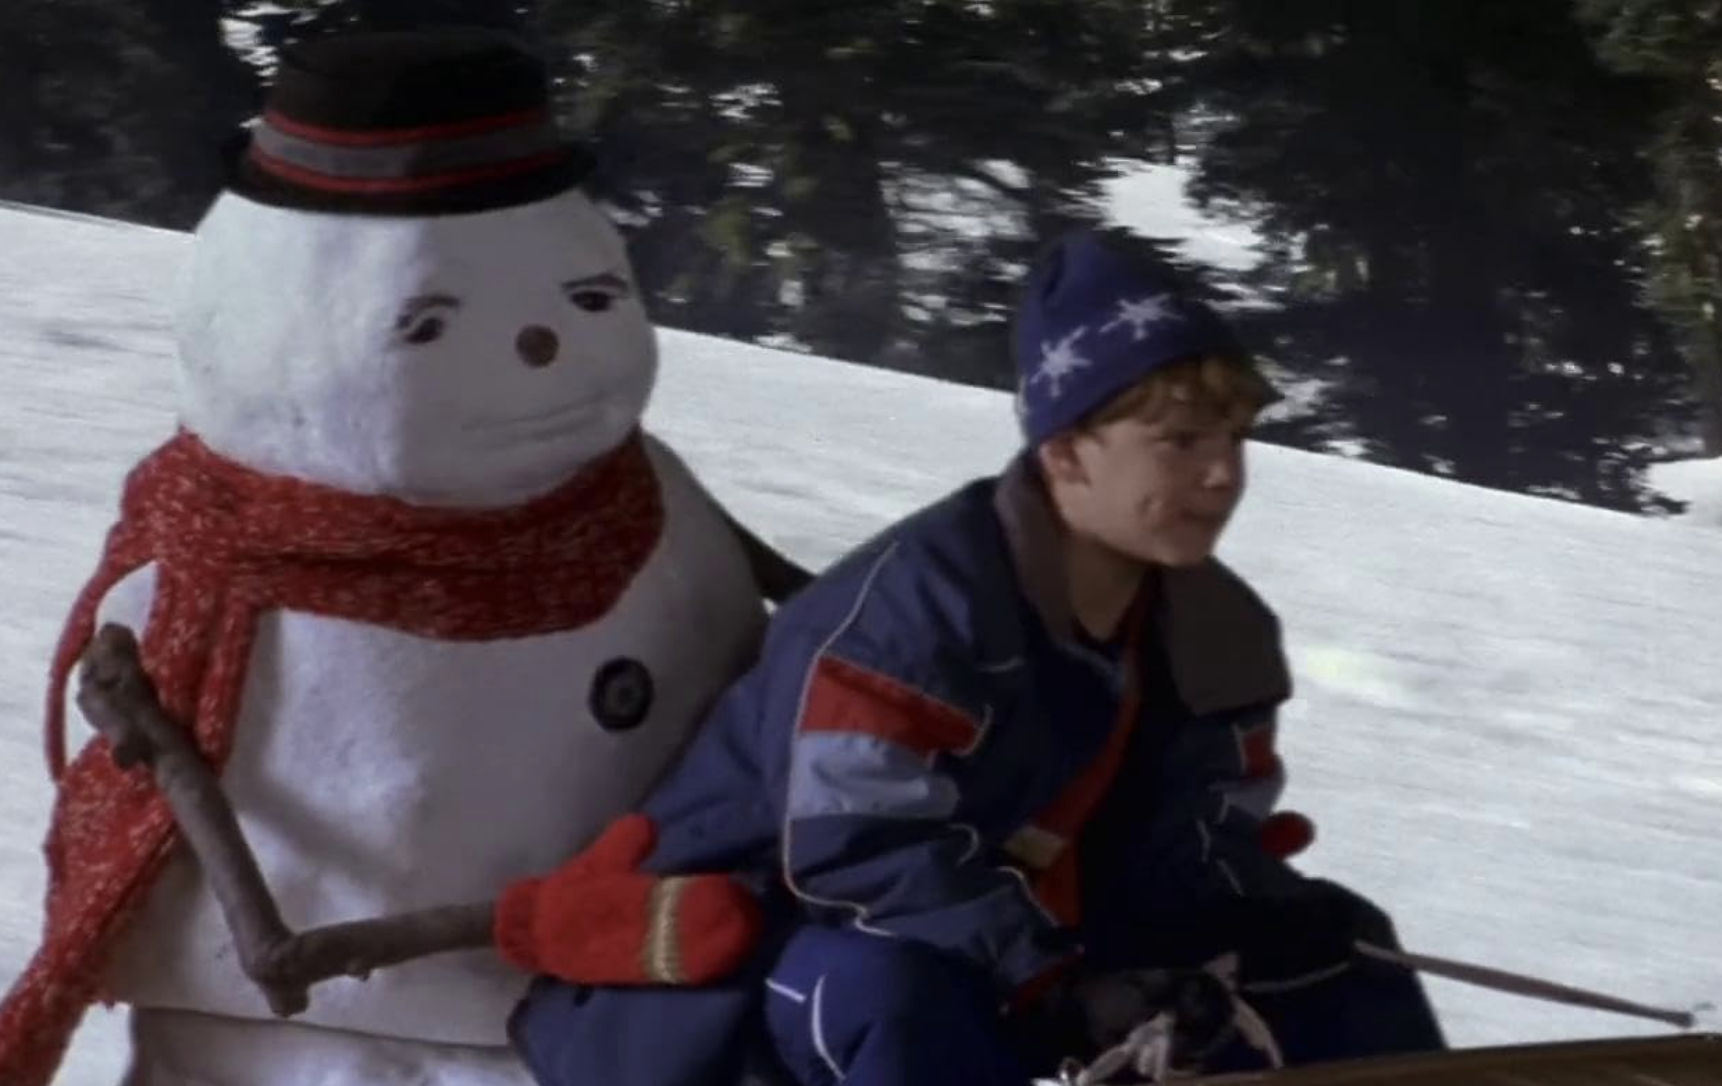 A boy in winter clothes sits on the front of a sled as it zips down a snow-covered hill. Behind him sits a snowman holding onto his waist.